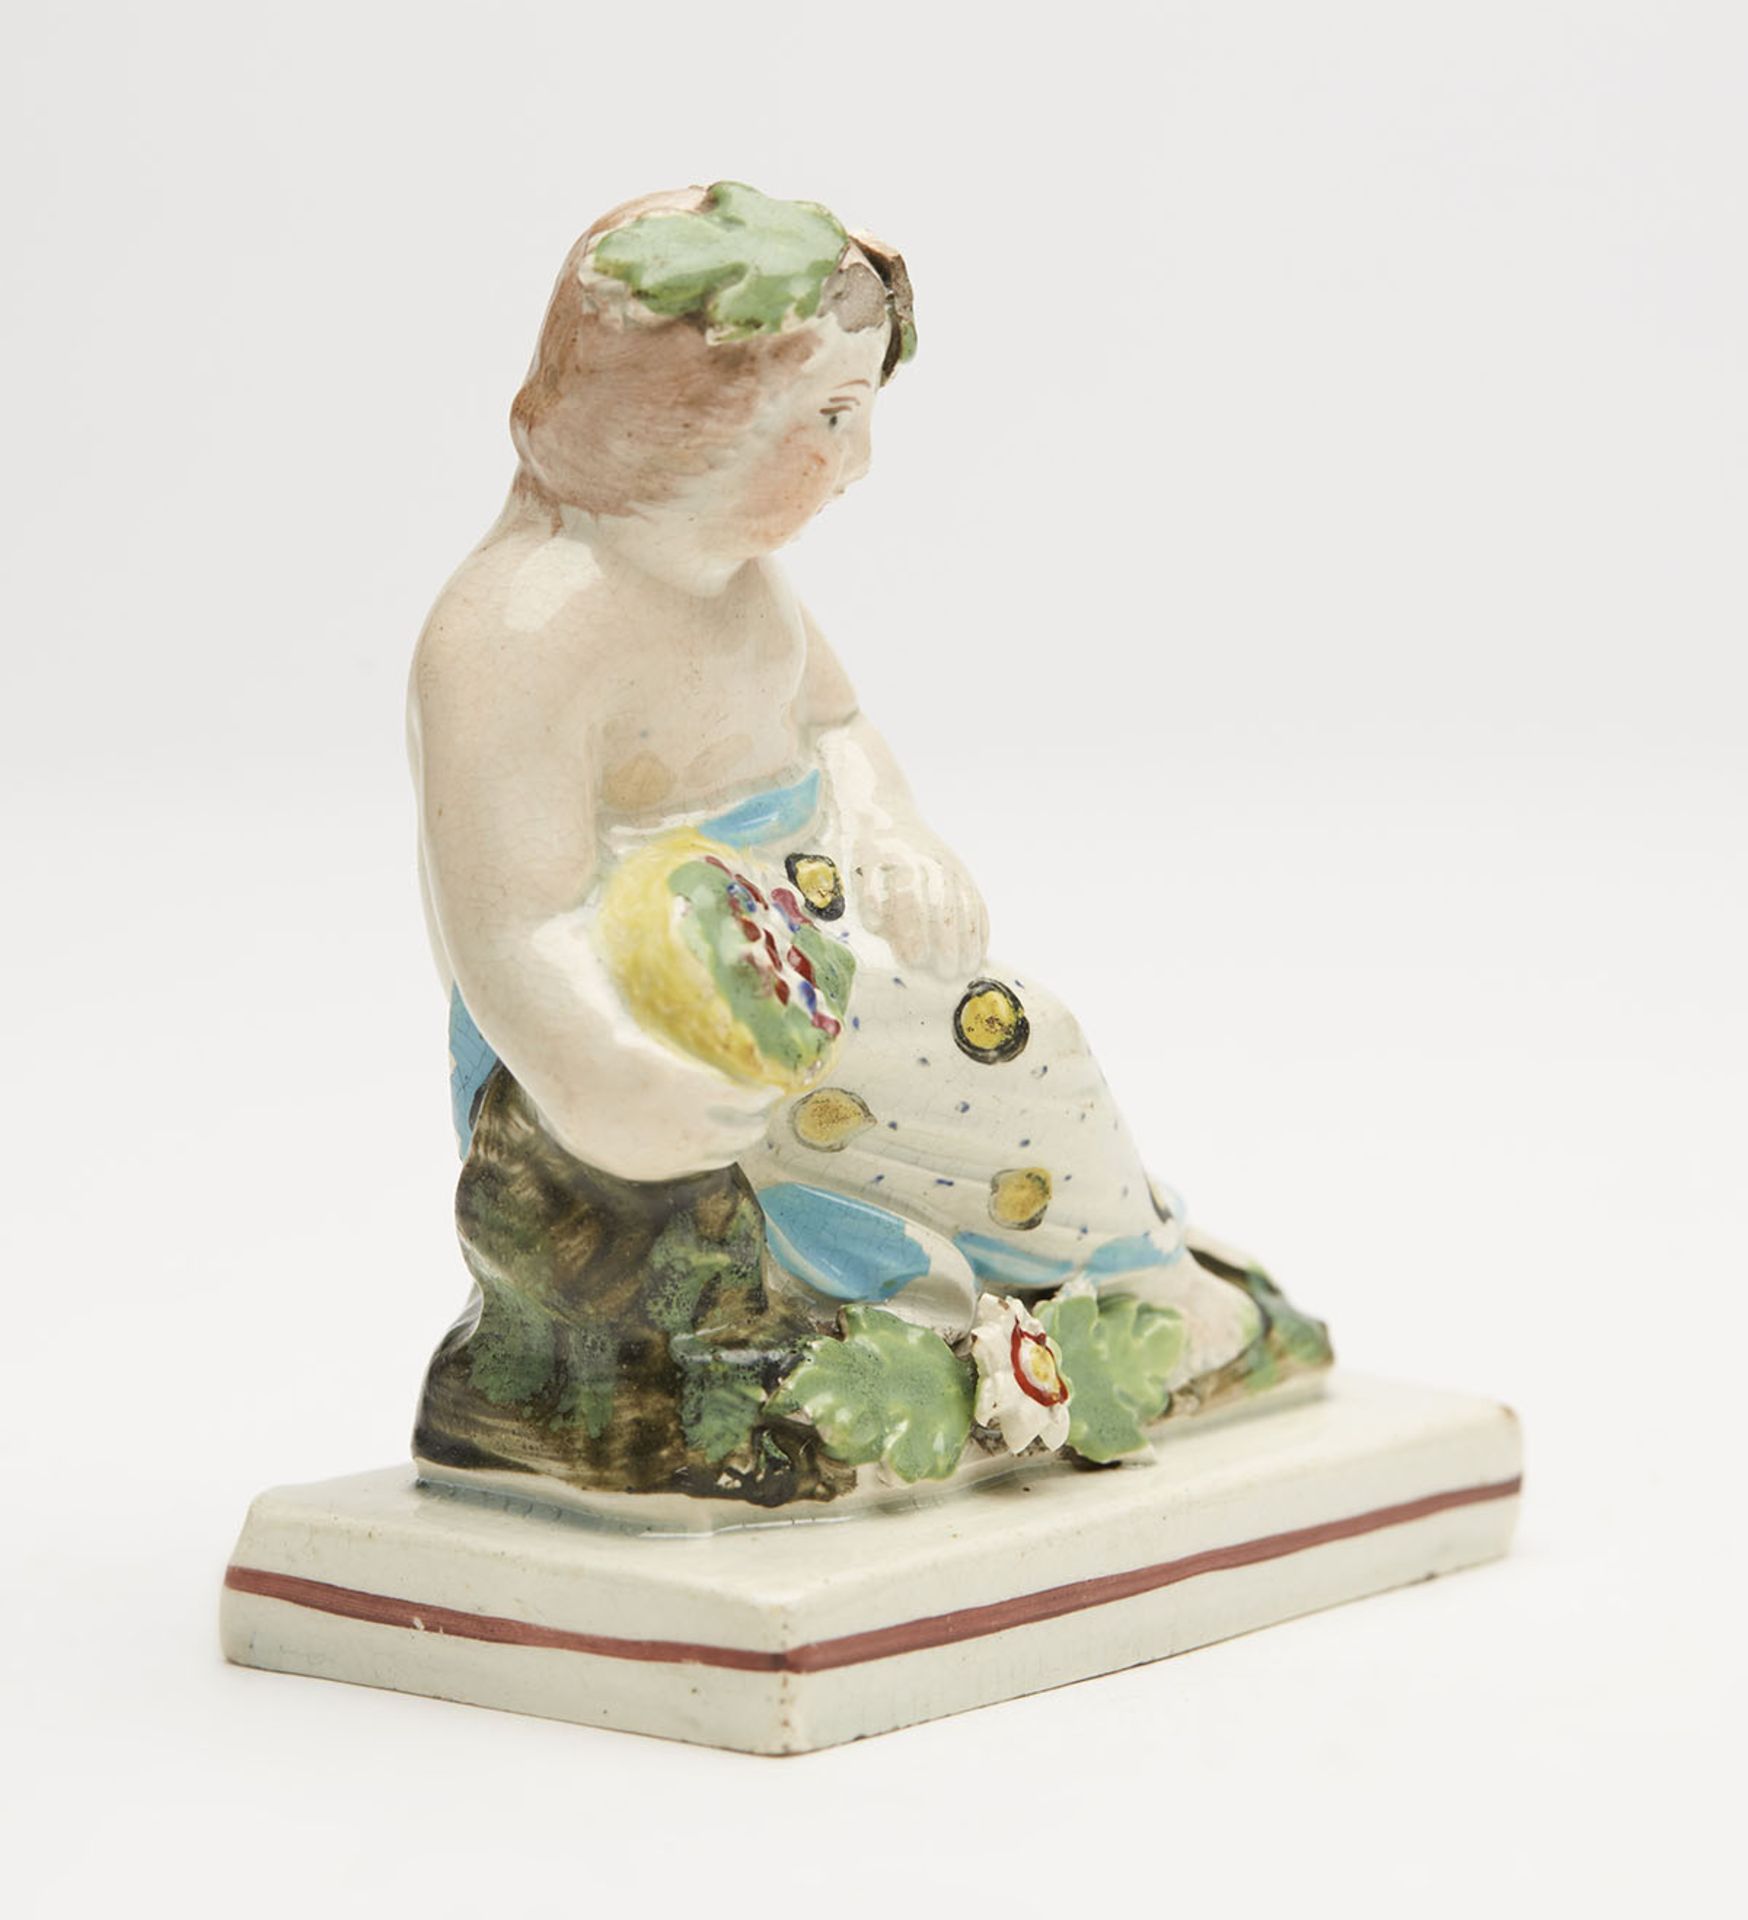 ANTIQUE STAFFORDSHIRE PEARLWARE RECLINING LADY FIGURE c1800 - Image 3 of 8